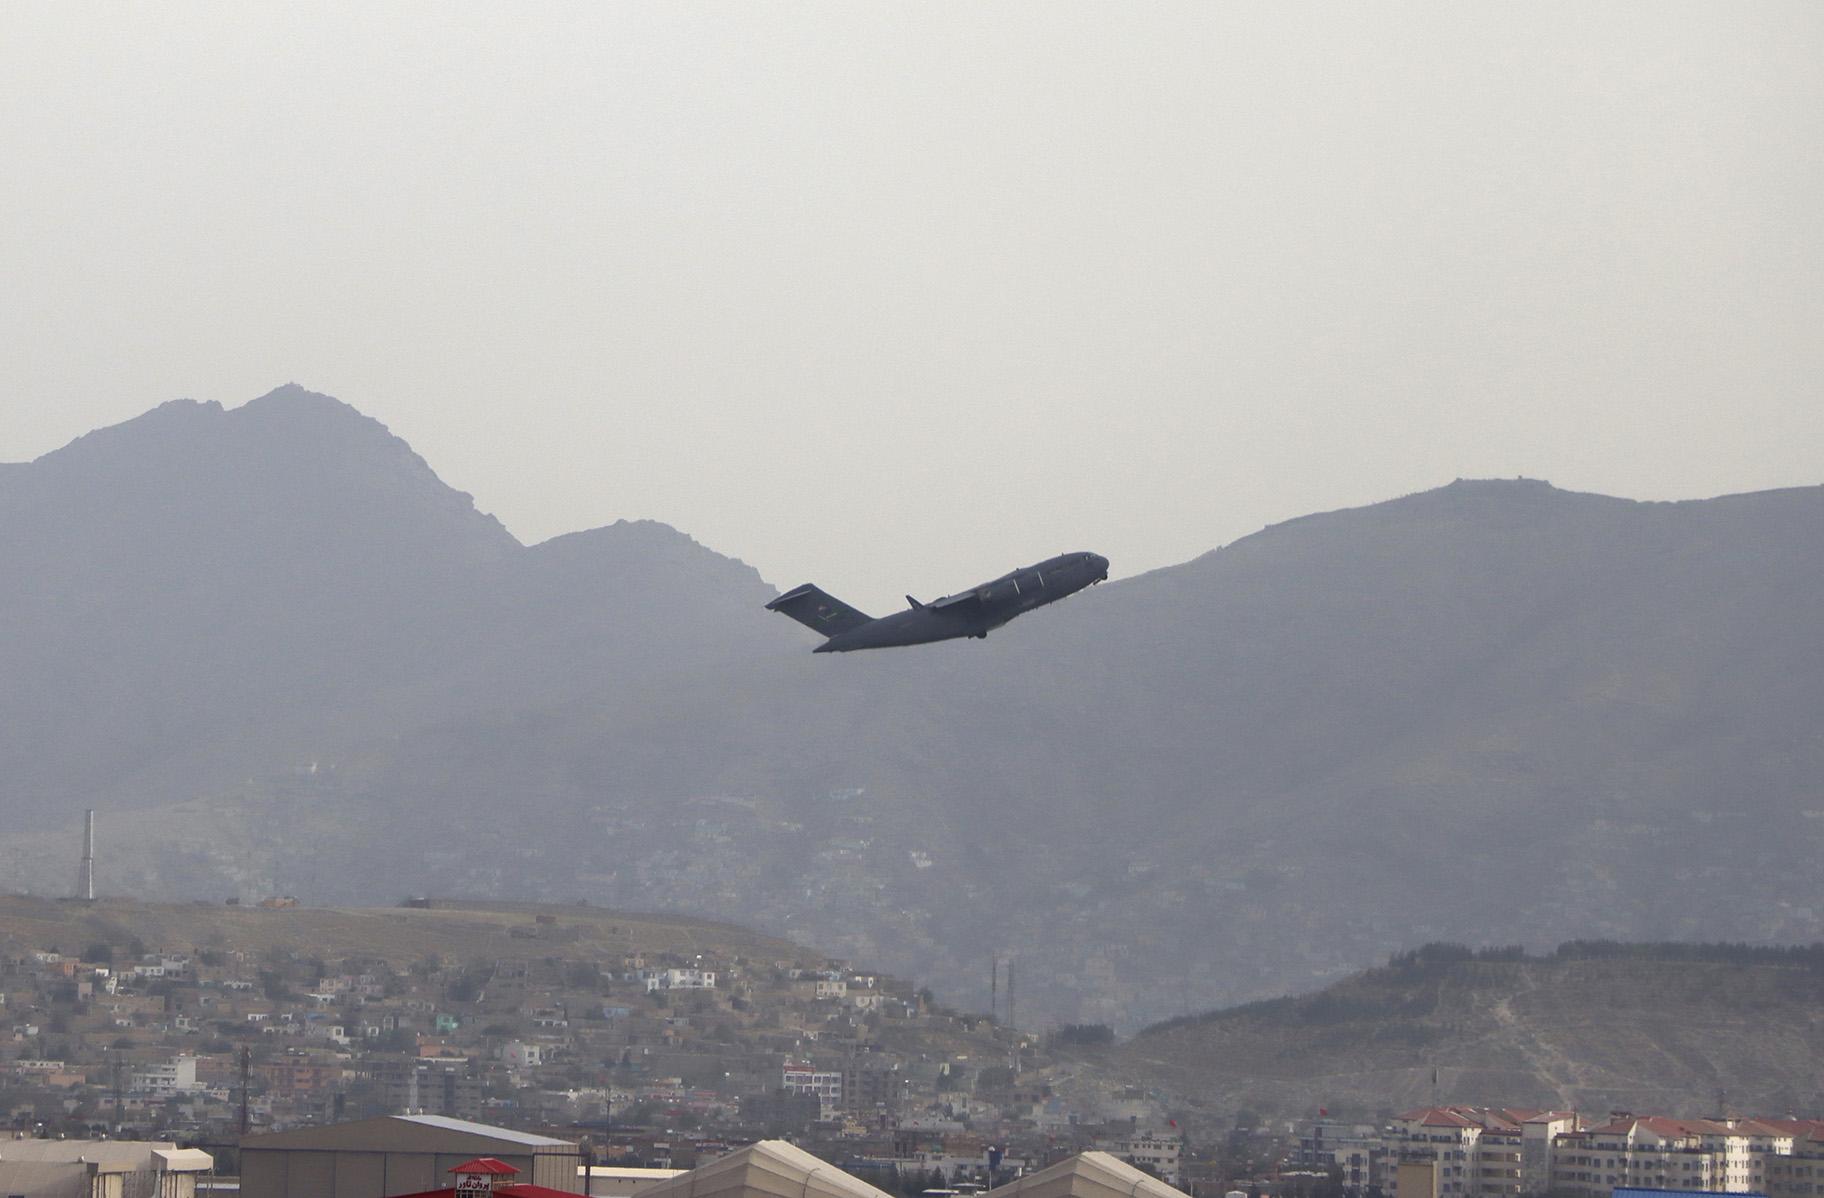 A U.S military aircraft takes off from the Hamid Karzai International Airport in Kabul, Afghanistan, Monday, Aug. 30, 2021. (AP Photo / Wali Sabawoon)